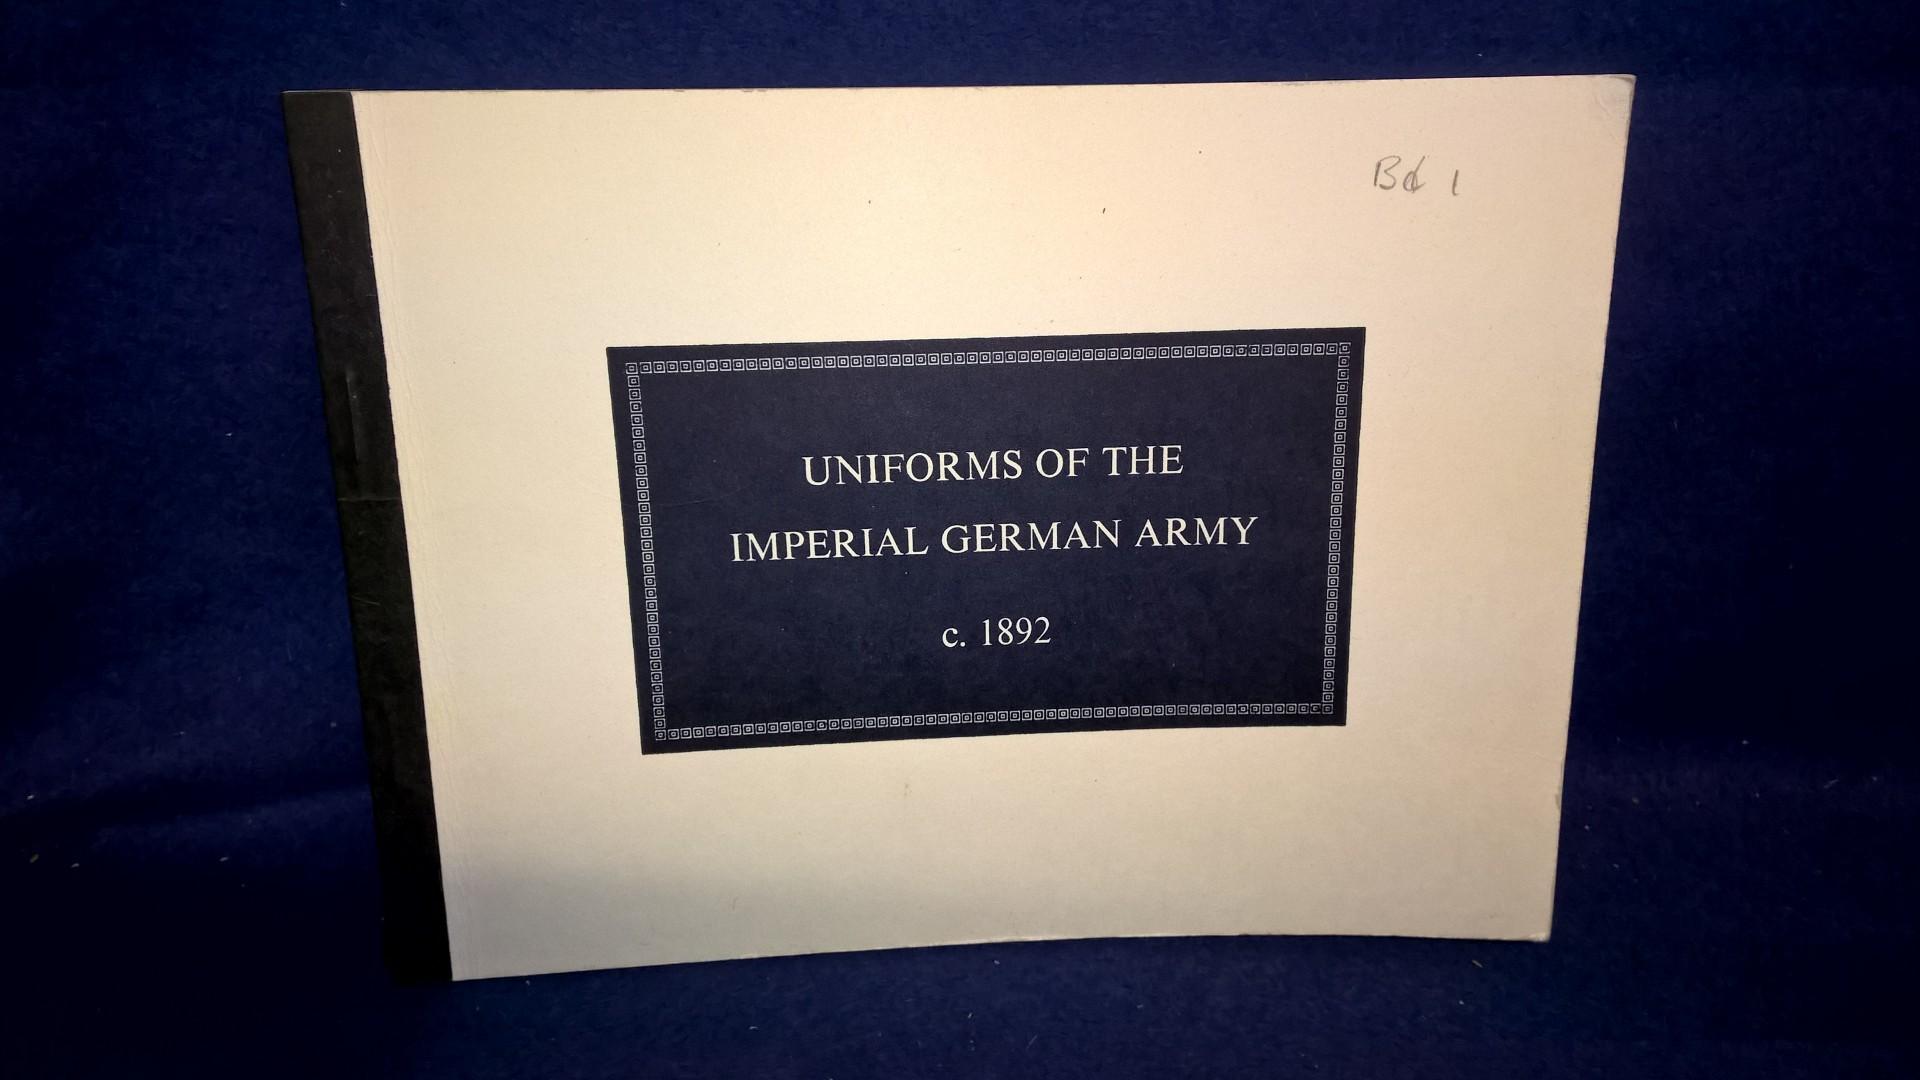 Uniforms of the Imperial German Army.